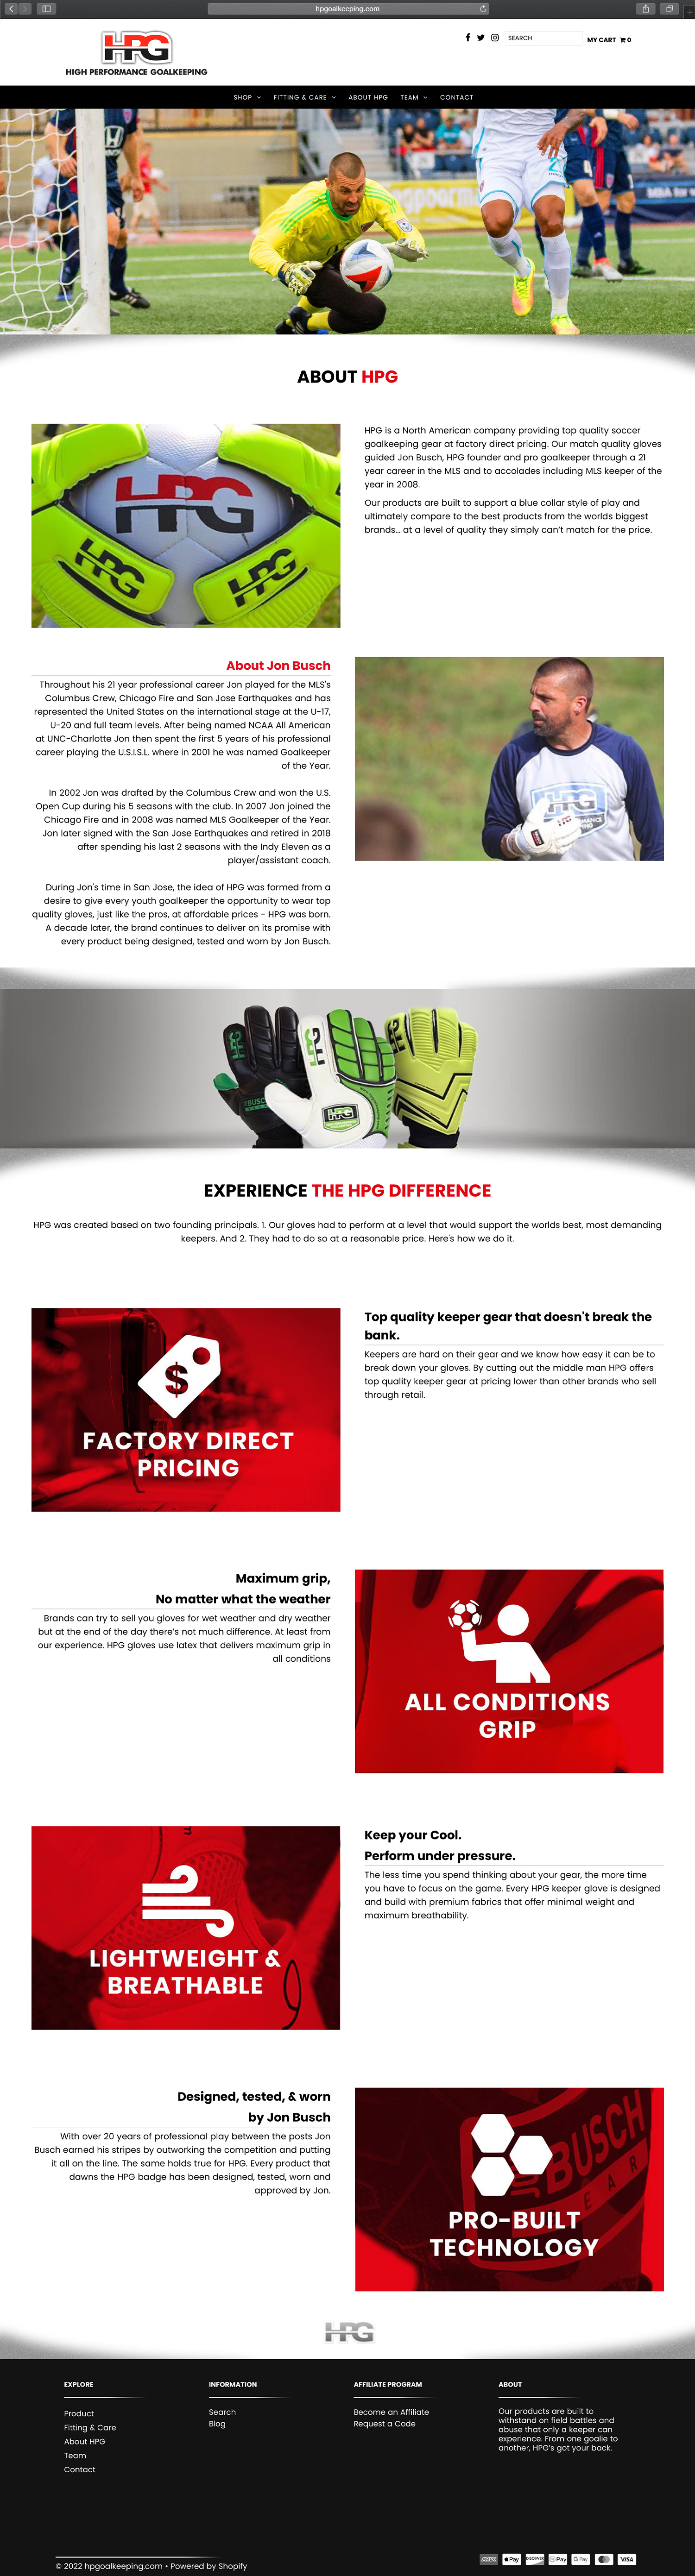 Website design and website development for HPG - secondary page view.